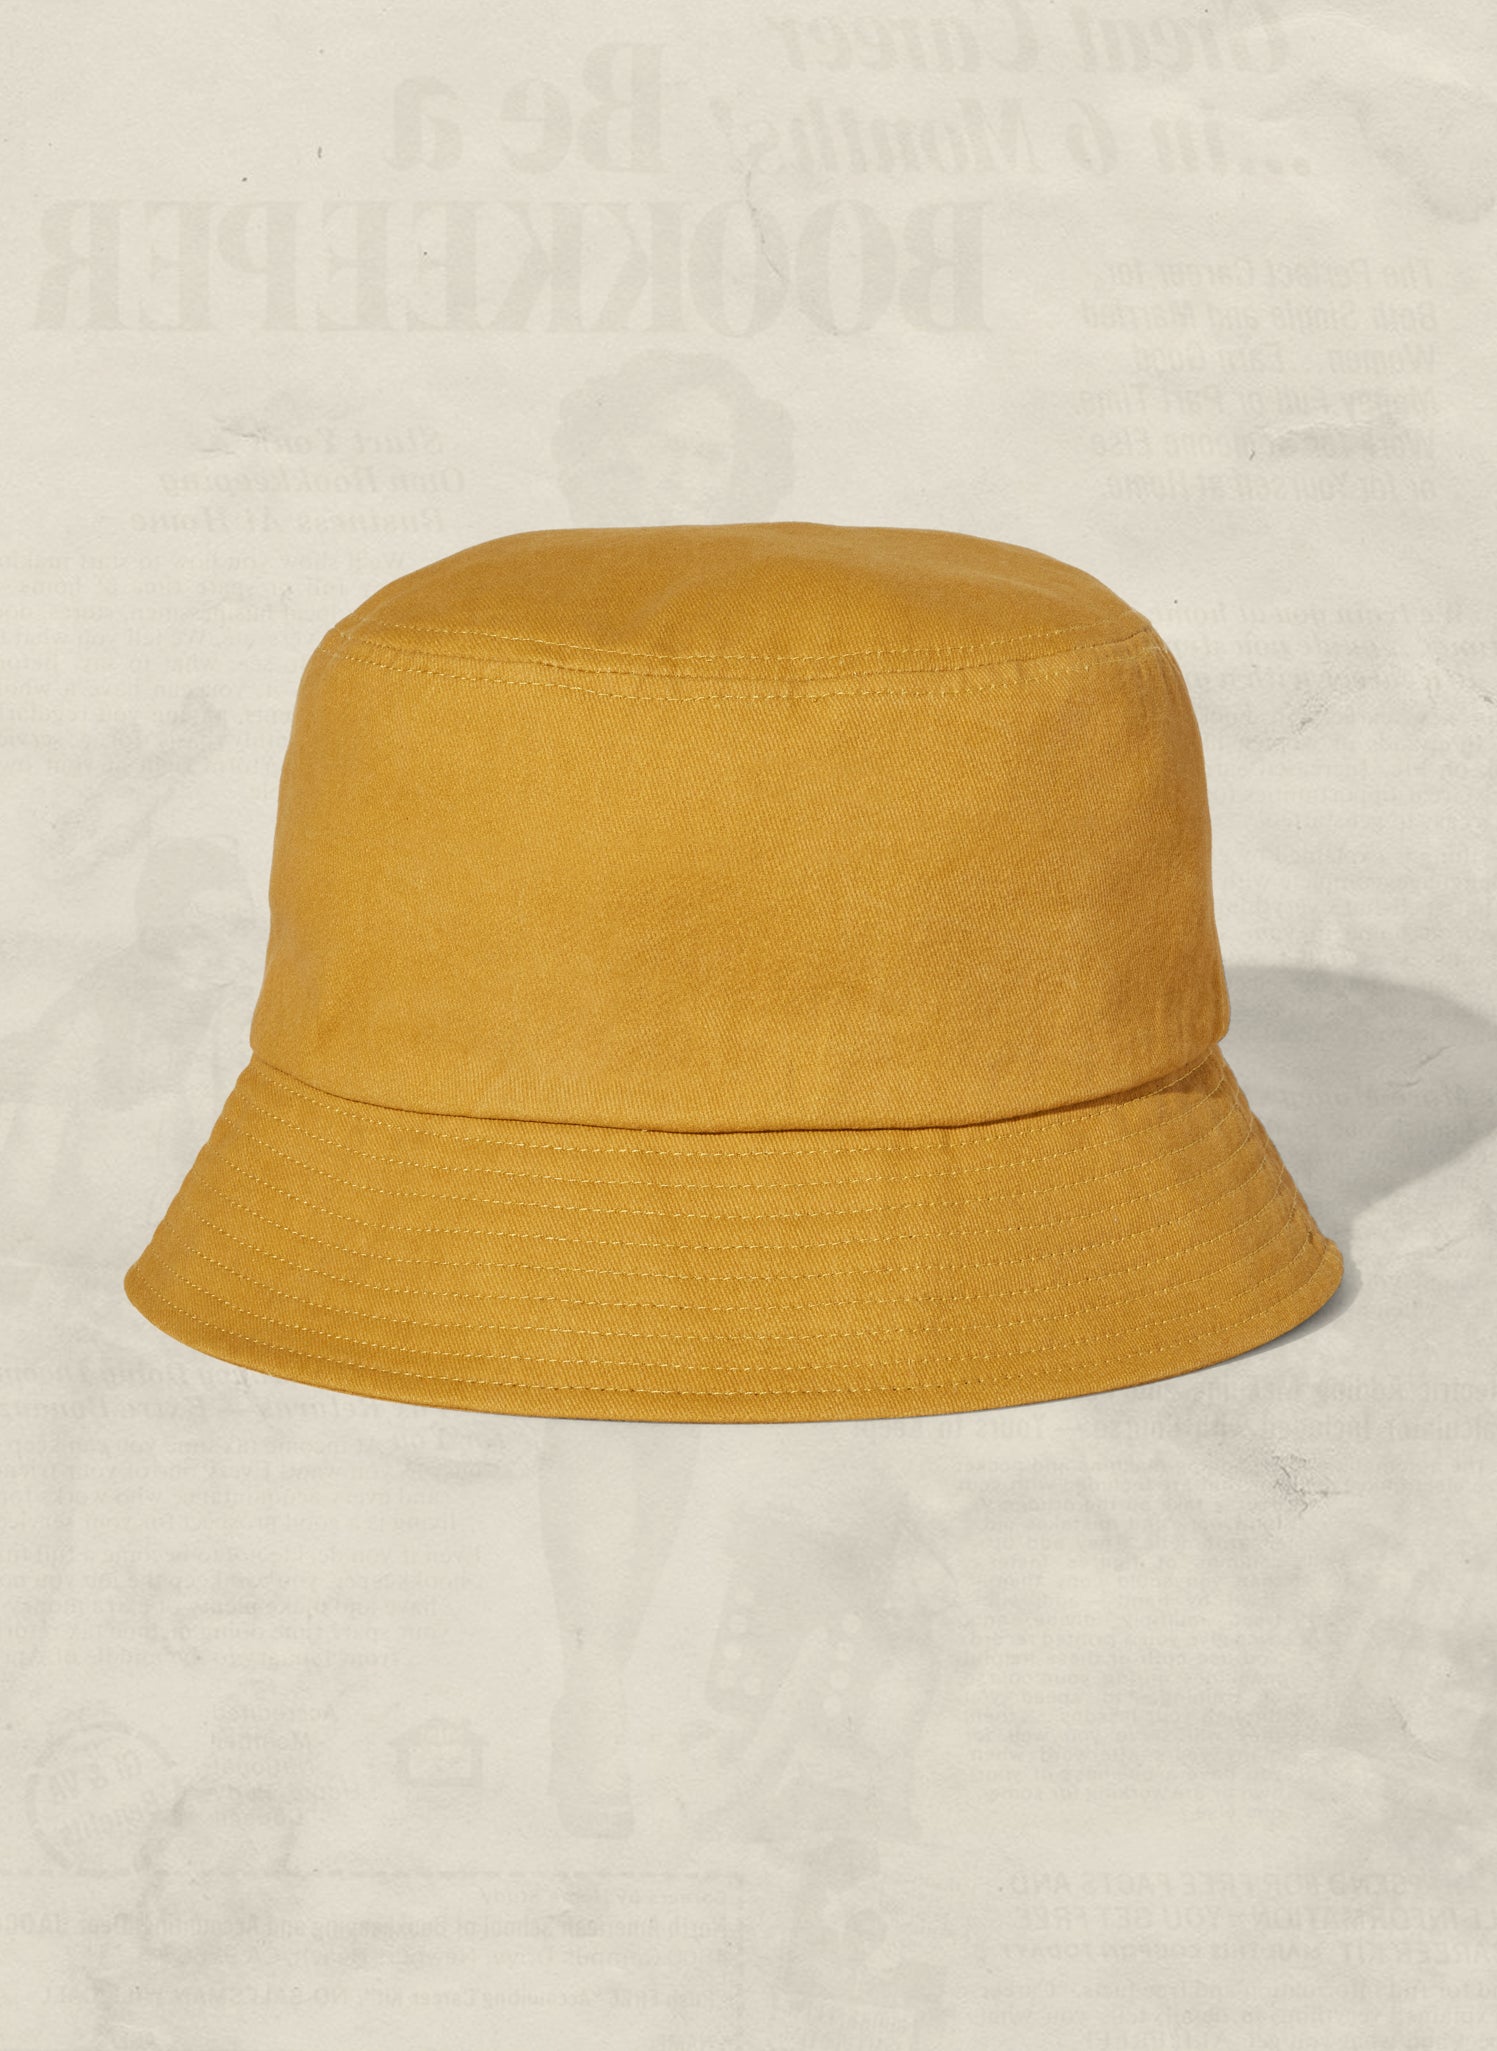 Vintage Washed Brushed Cotton Twill Bucket Hat by Weld Mfg. Earthy Color Wholesale Blank Hats for Creative Brands and Companies.